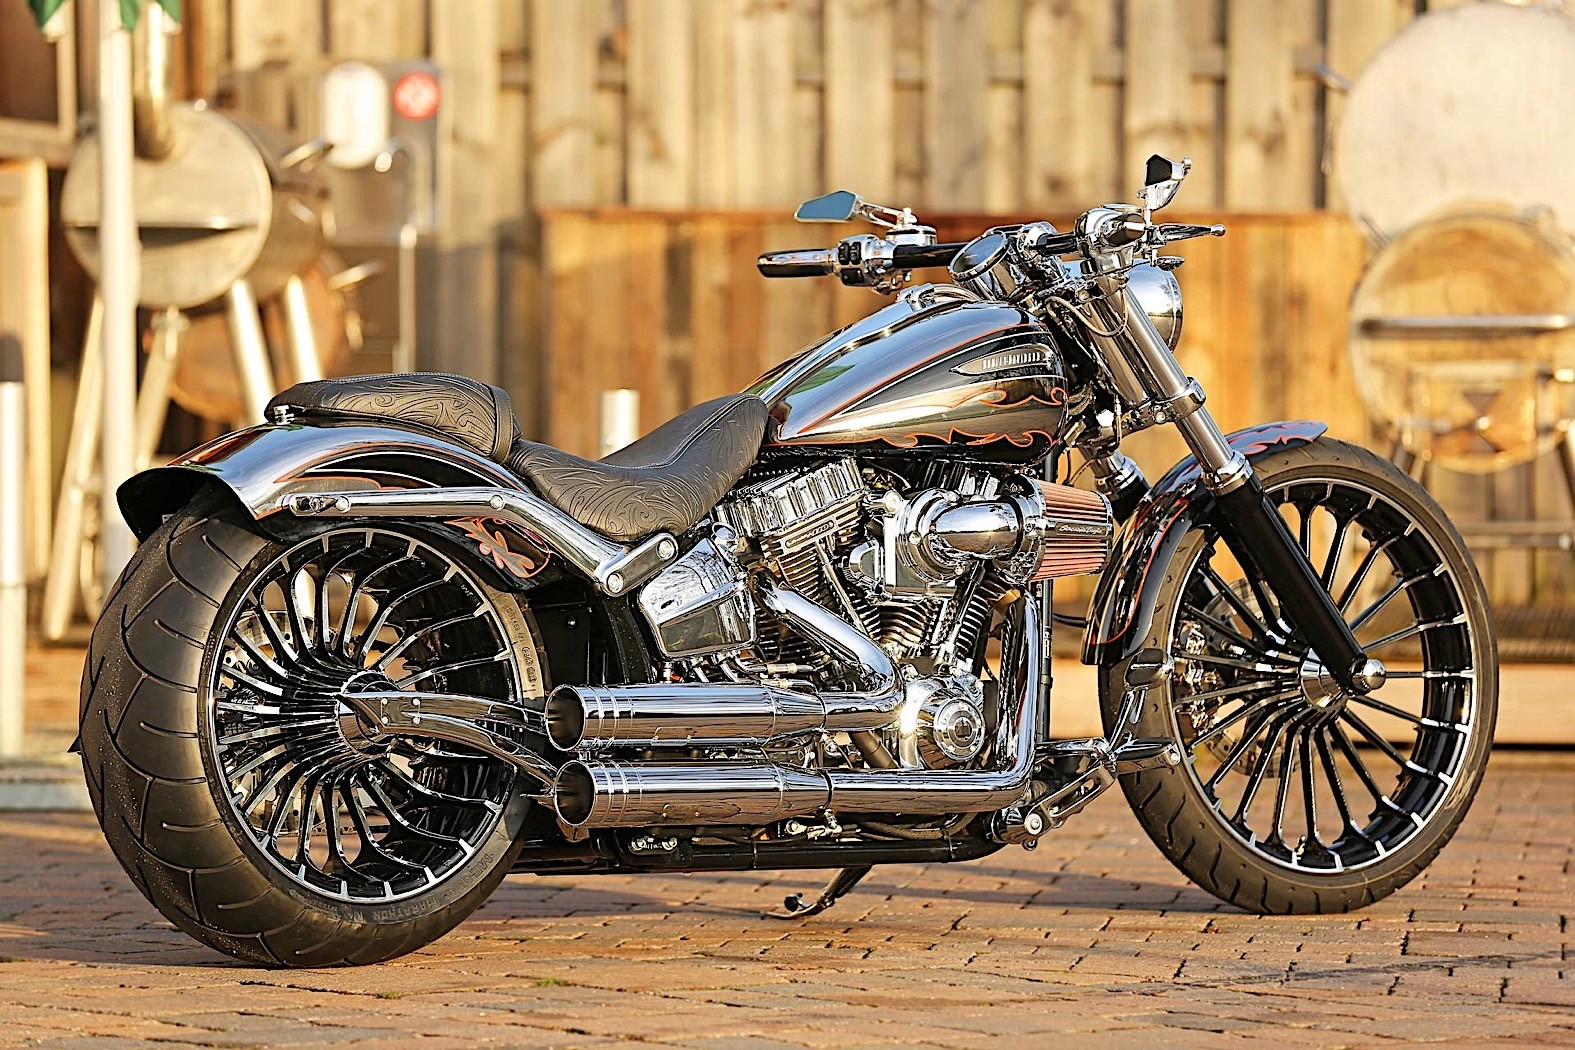 HarleyDavidson Breakout CVO Gets an Extra Touch of German Custom